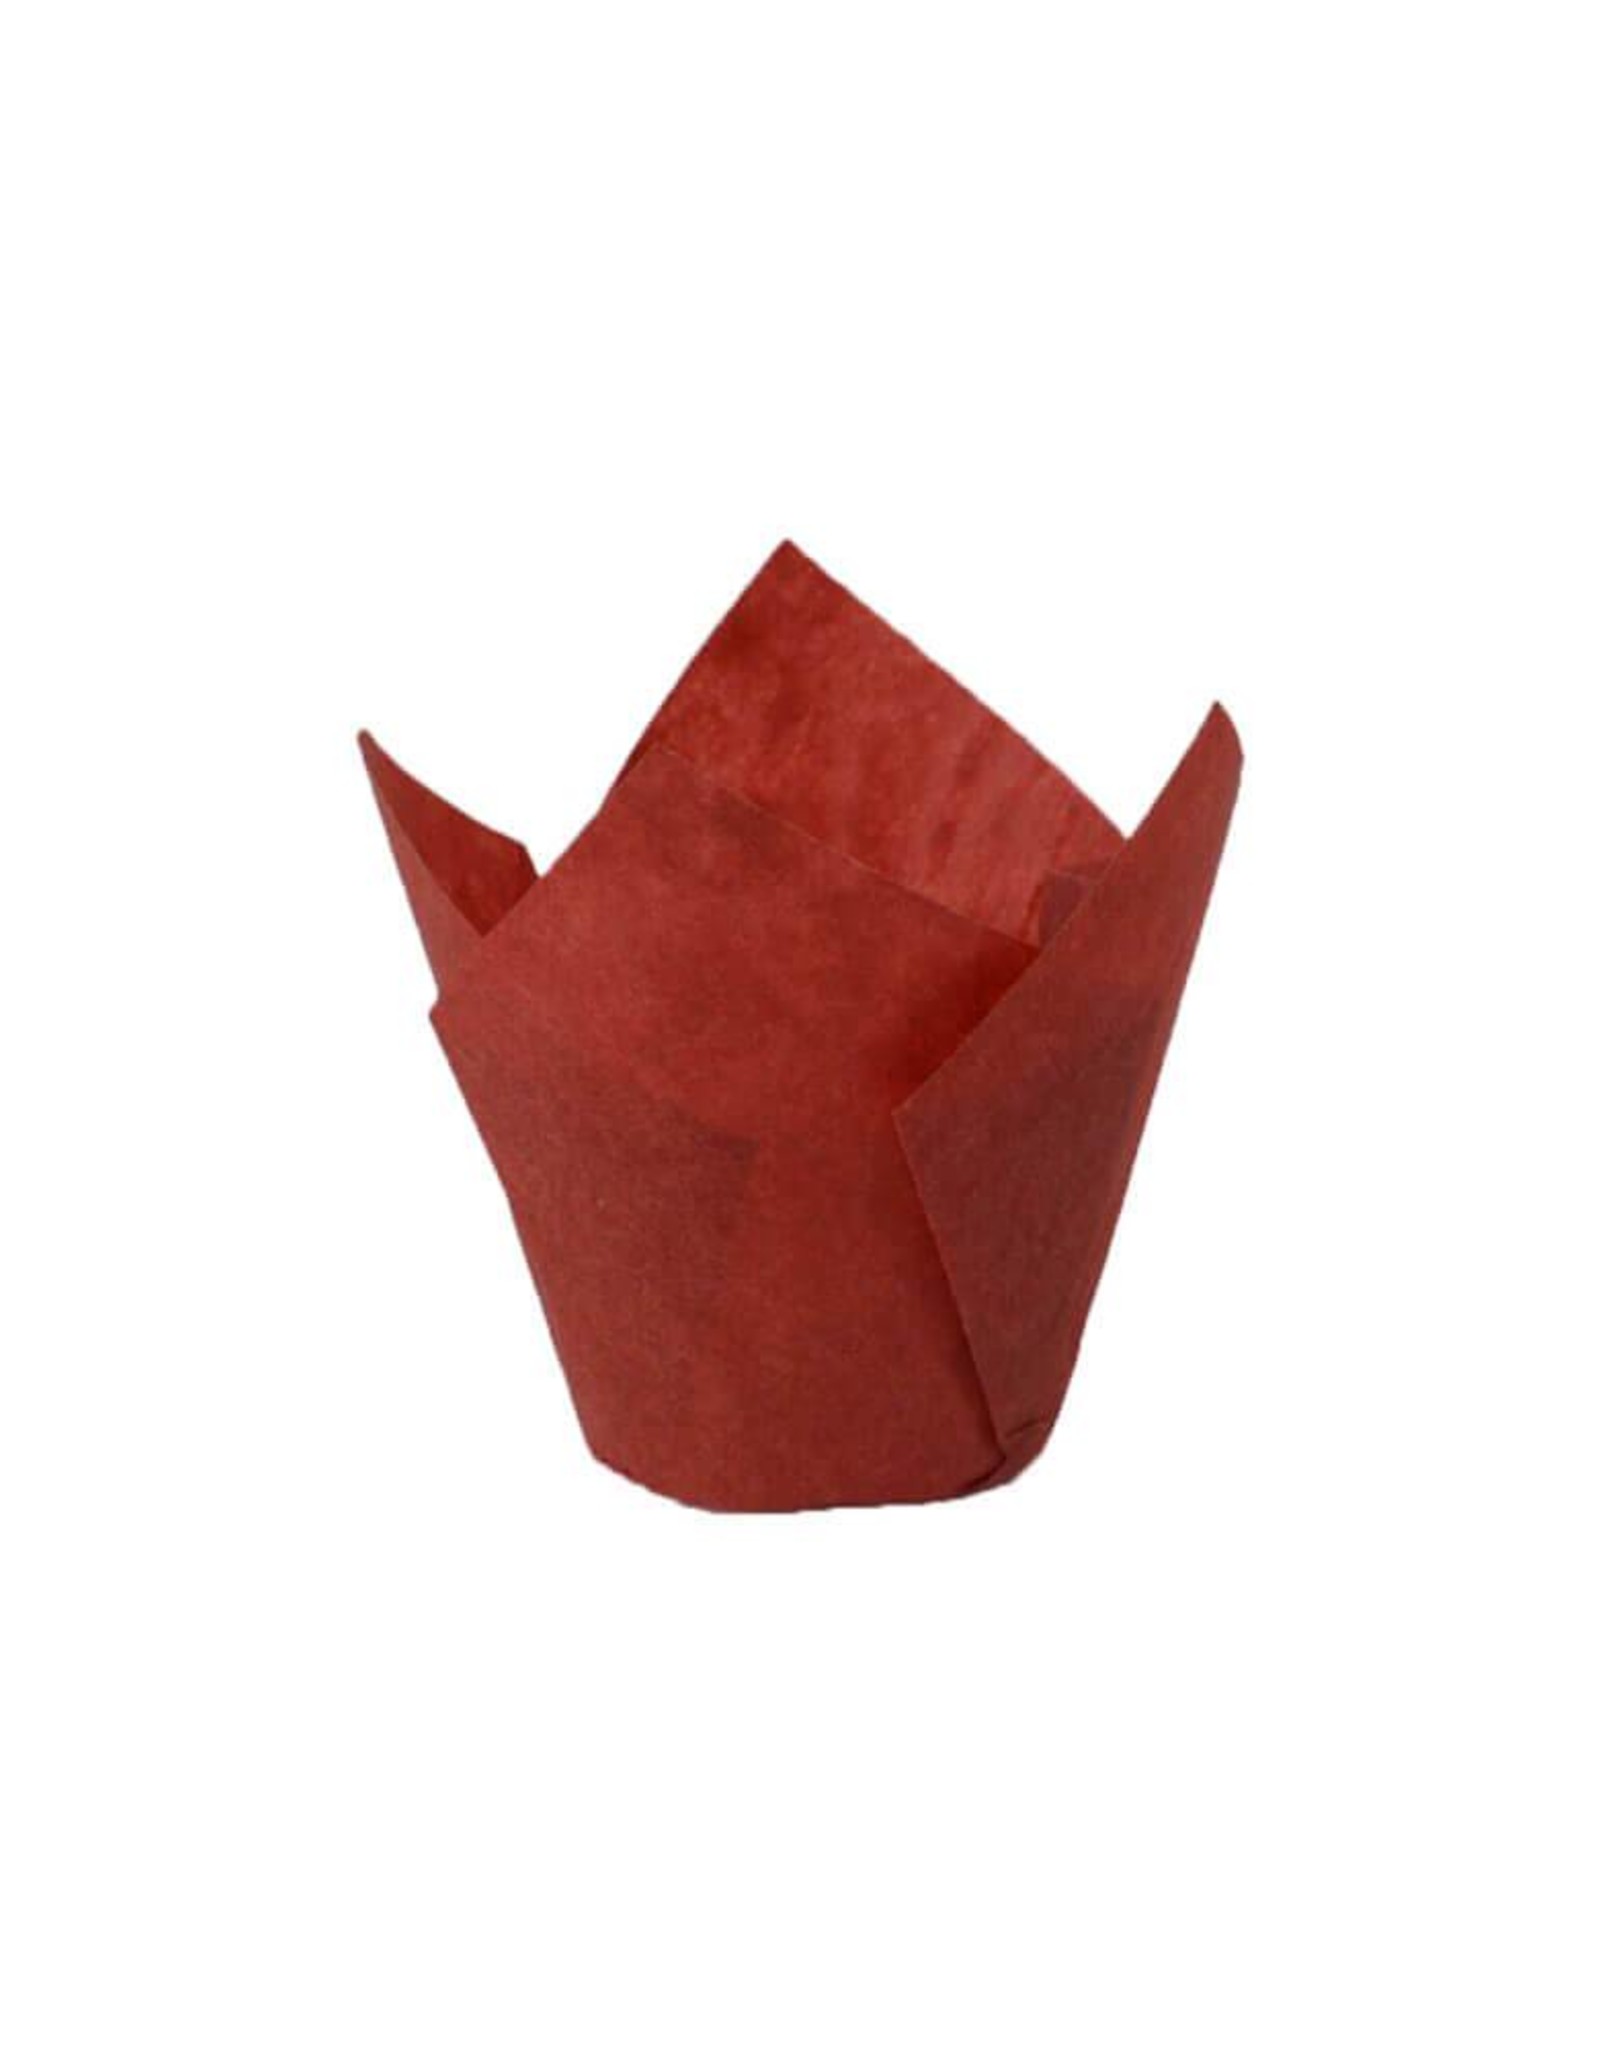 Red Tulip Baking Cups (24ct)